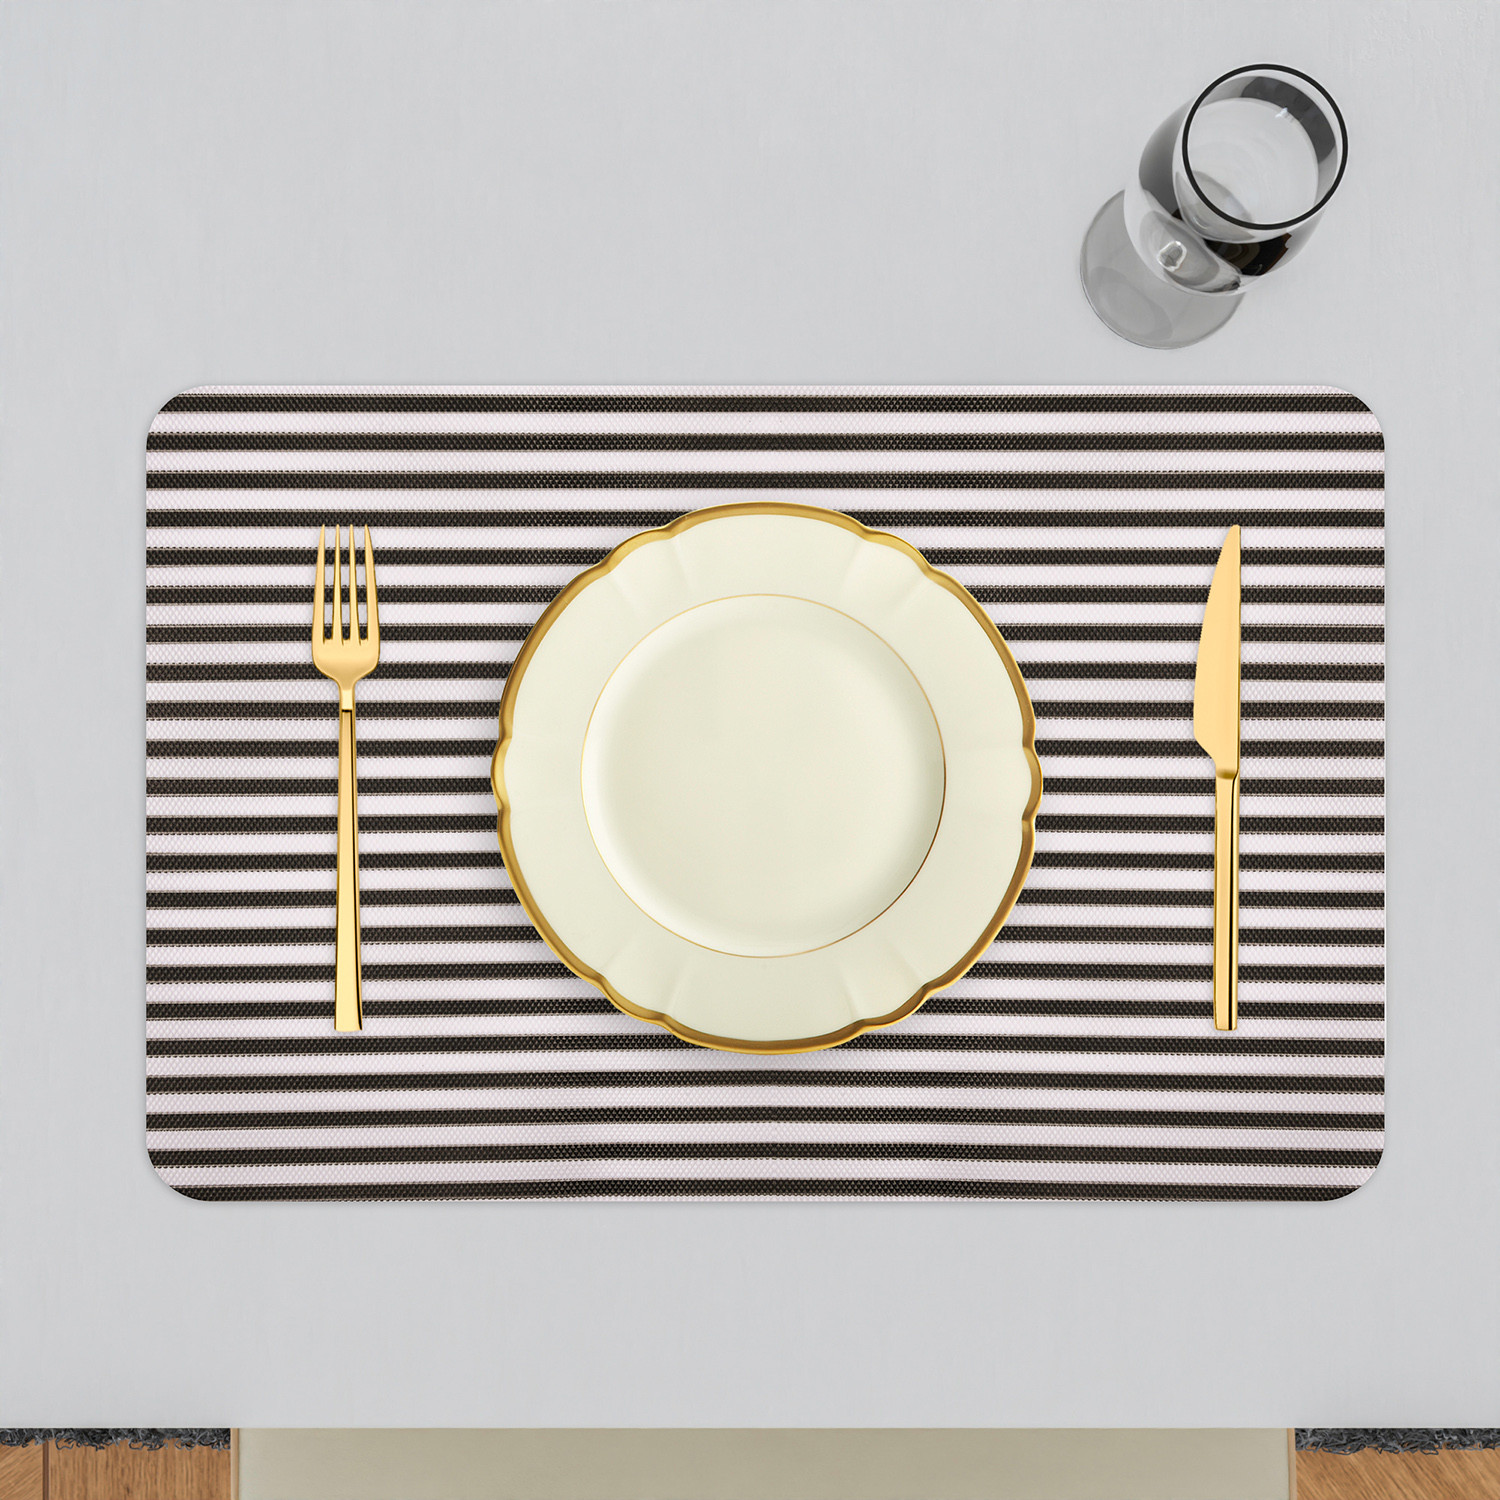 Kuber Industries Placemat | Placemats for Dining Room | Anti-Slip Table Mat Set | Placemats for Kitchen Table | Dining Table Placemats | Lining-Design Placemat | 6 Piece Set | Black